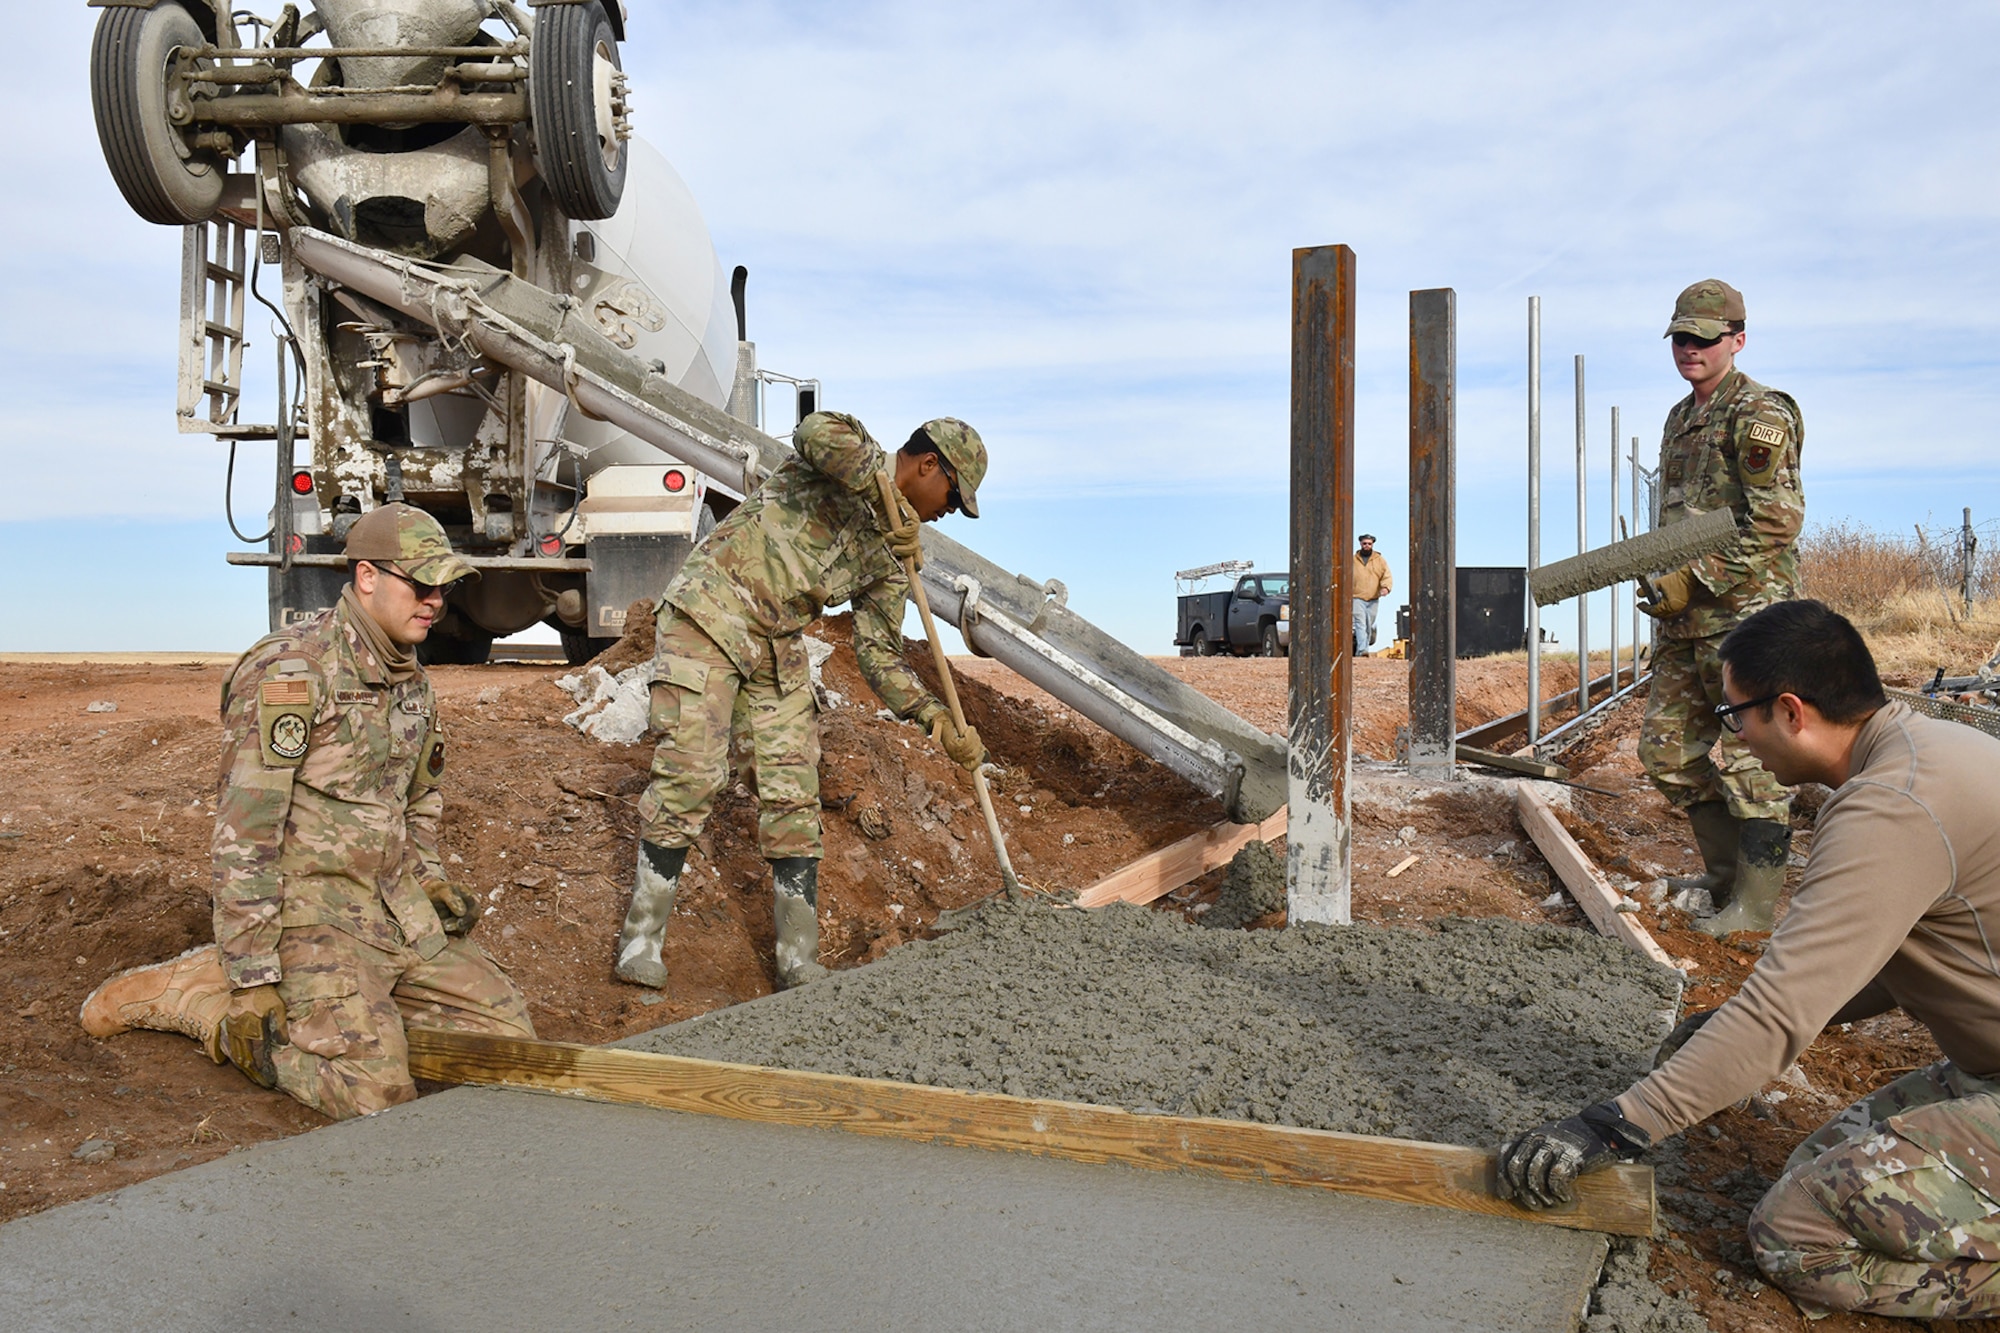 Members of the 97th Civil Engineer Squadron (CES) work on the concrete foundation of a new frangible flood gate at Altus Air Force Base, Oklahoma, Dec. 9, 2021. Each of these gates, designed and built by the 97 CES, saves an average of $90K per gate compared to similar work performed by contractors. (U.S. Air Force photo by Tech. Sgt. Robert Sizelove)